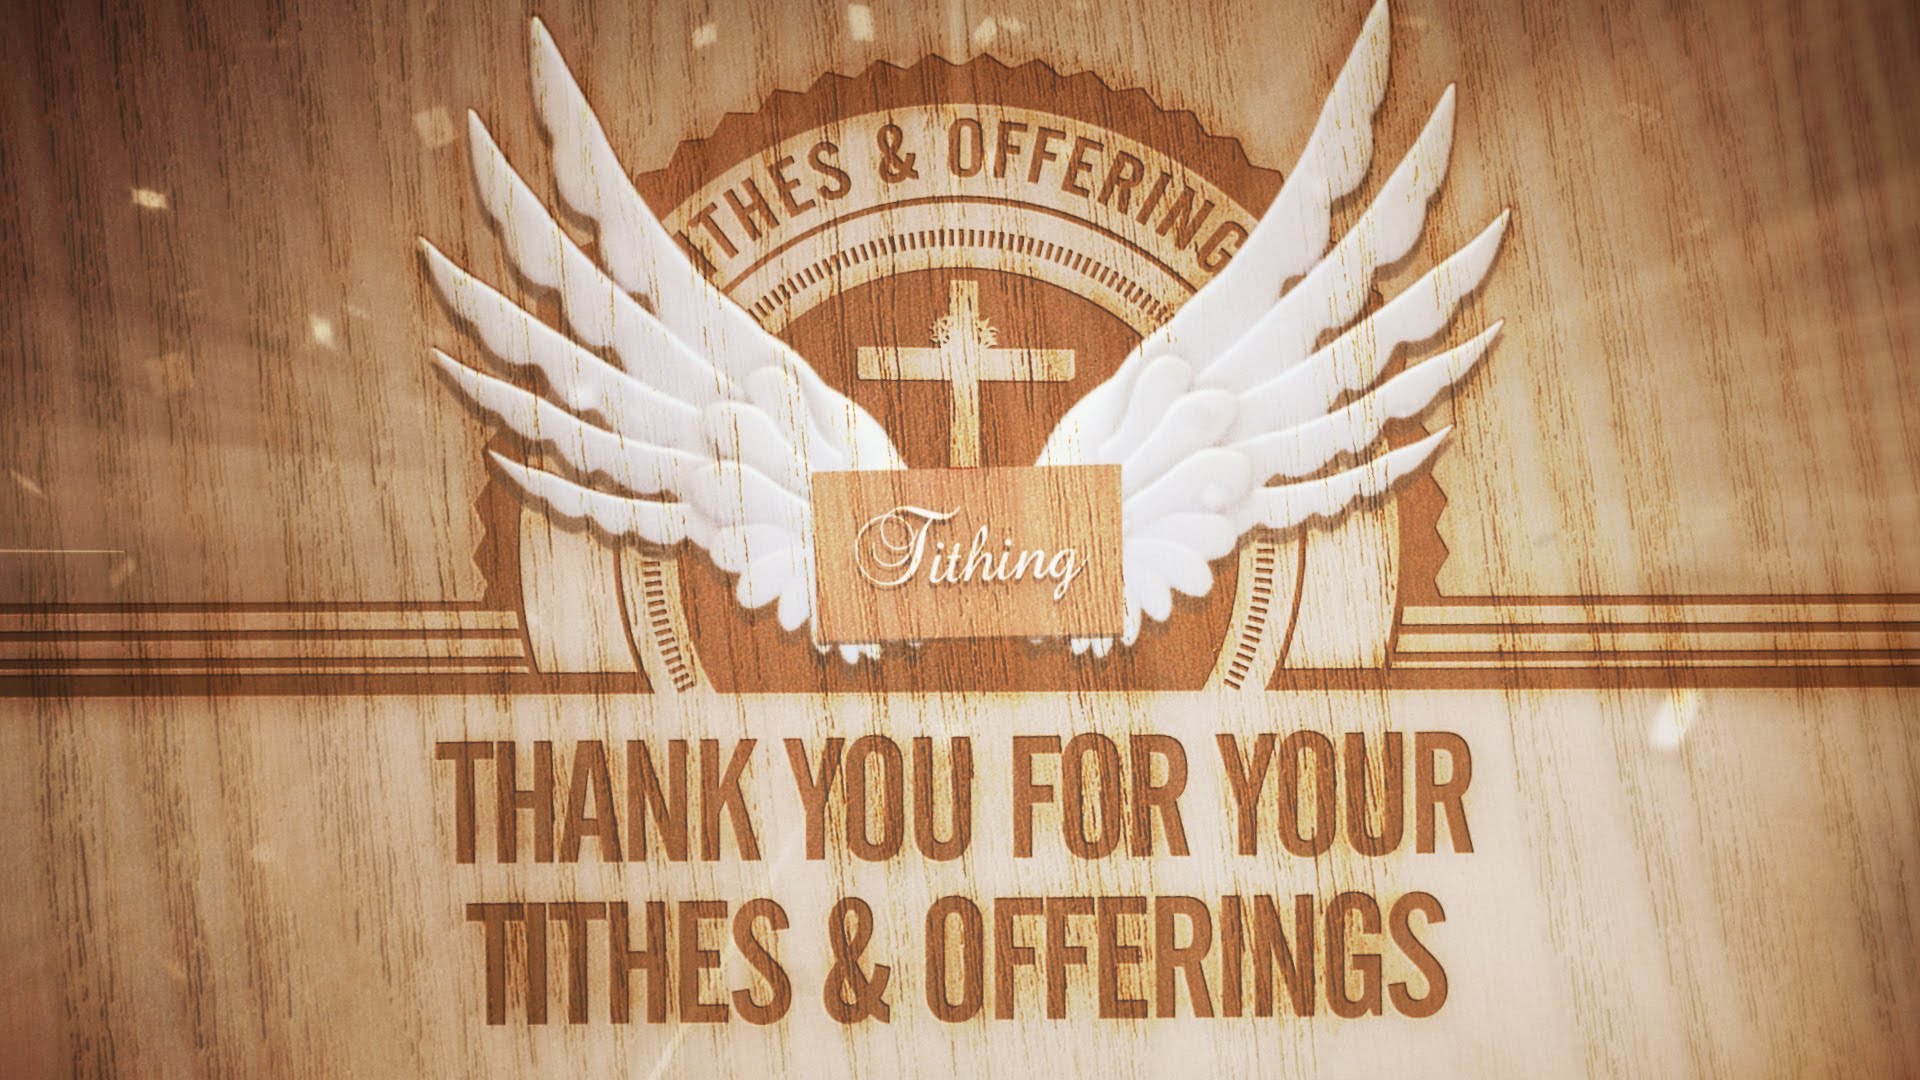 Thank you for your Tithes & Offerings